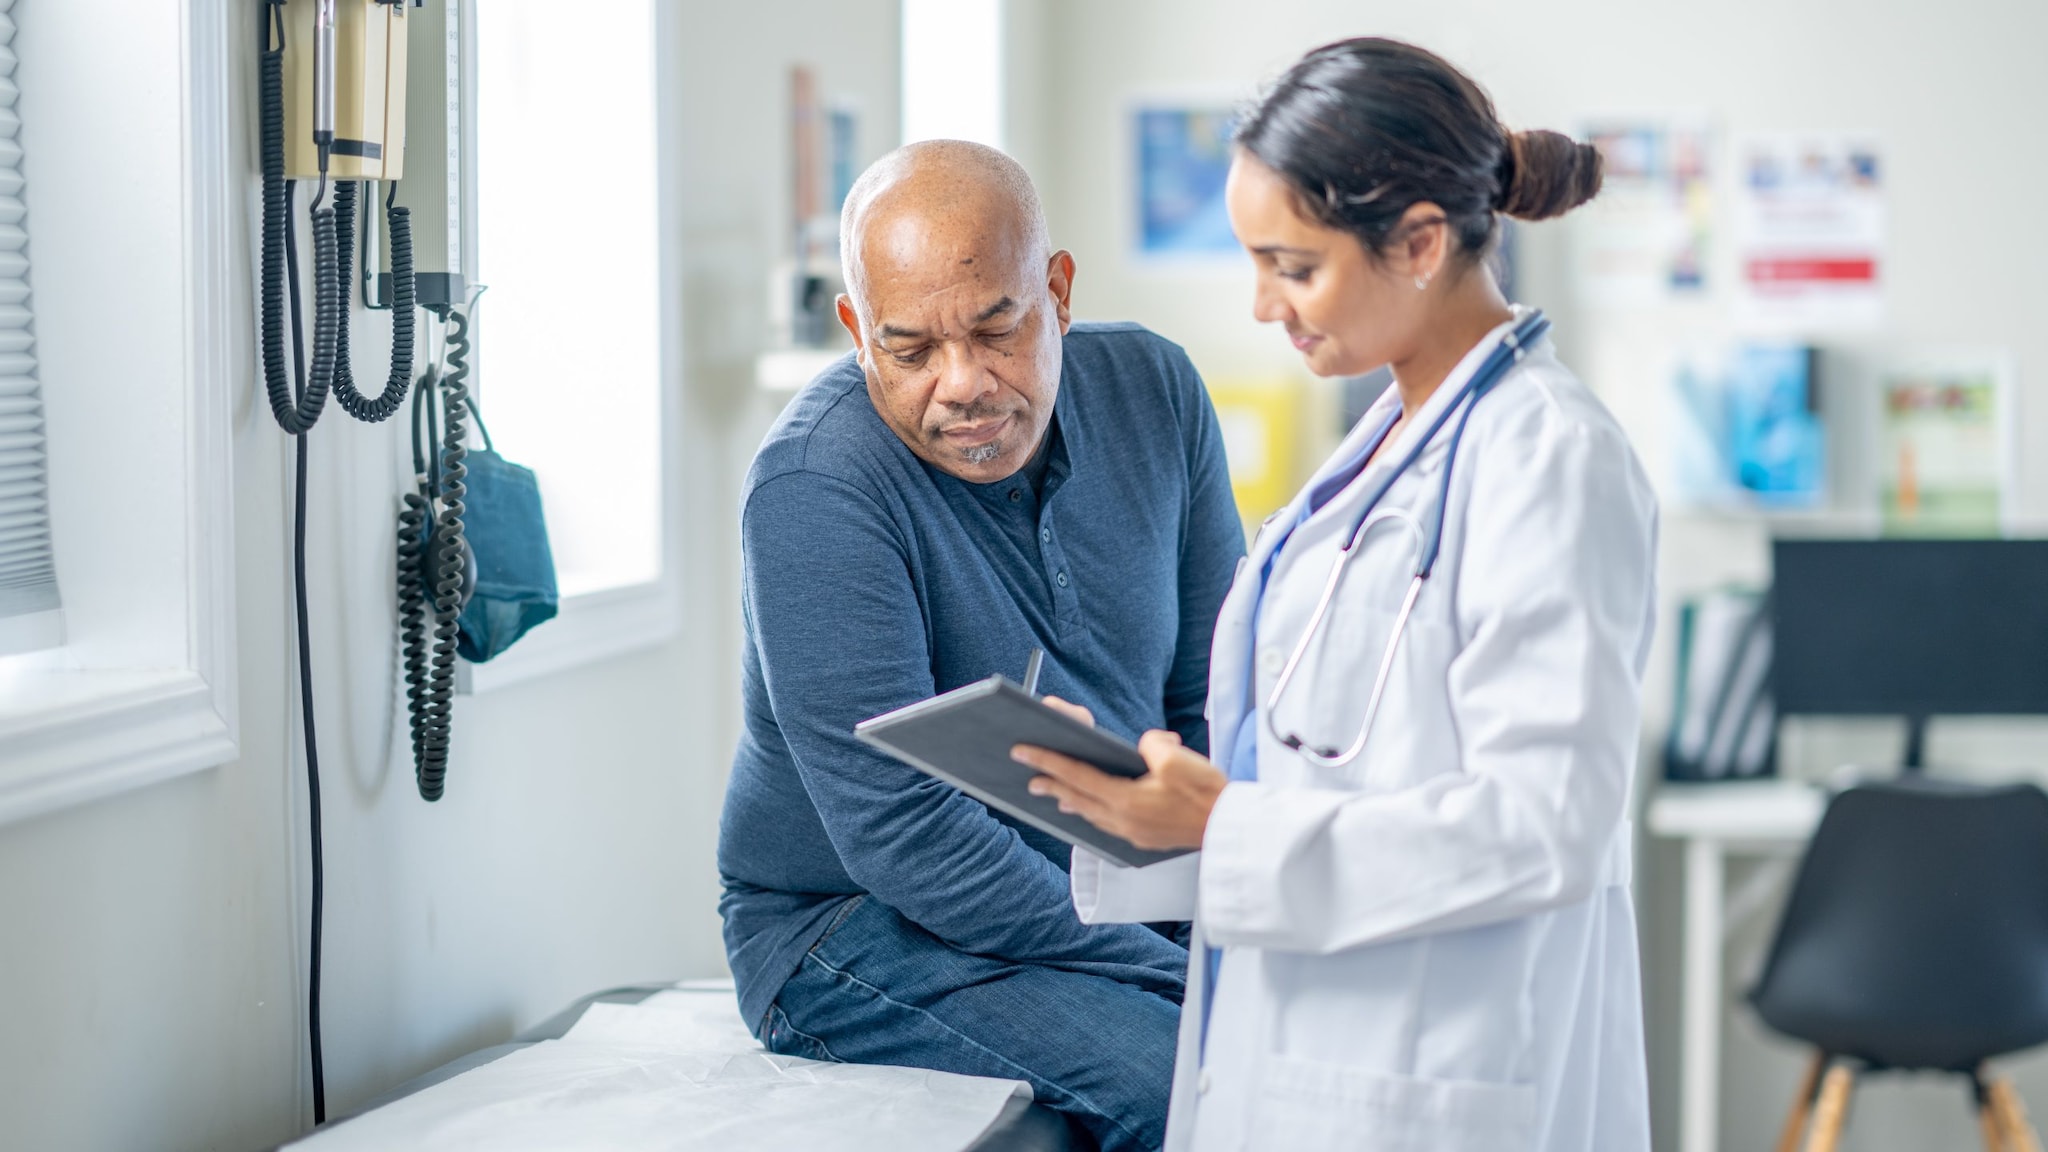 Healthcare provider and patient looking at something on a tablet during a wellness visit.